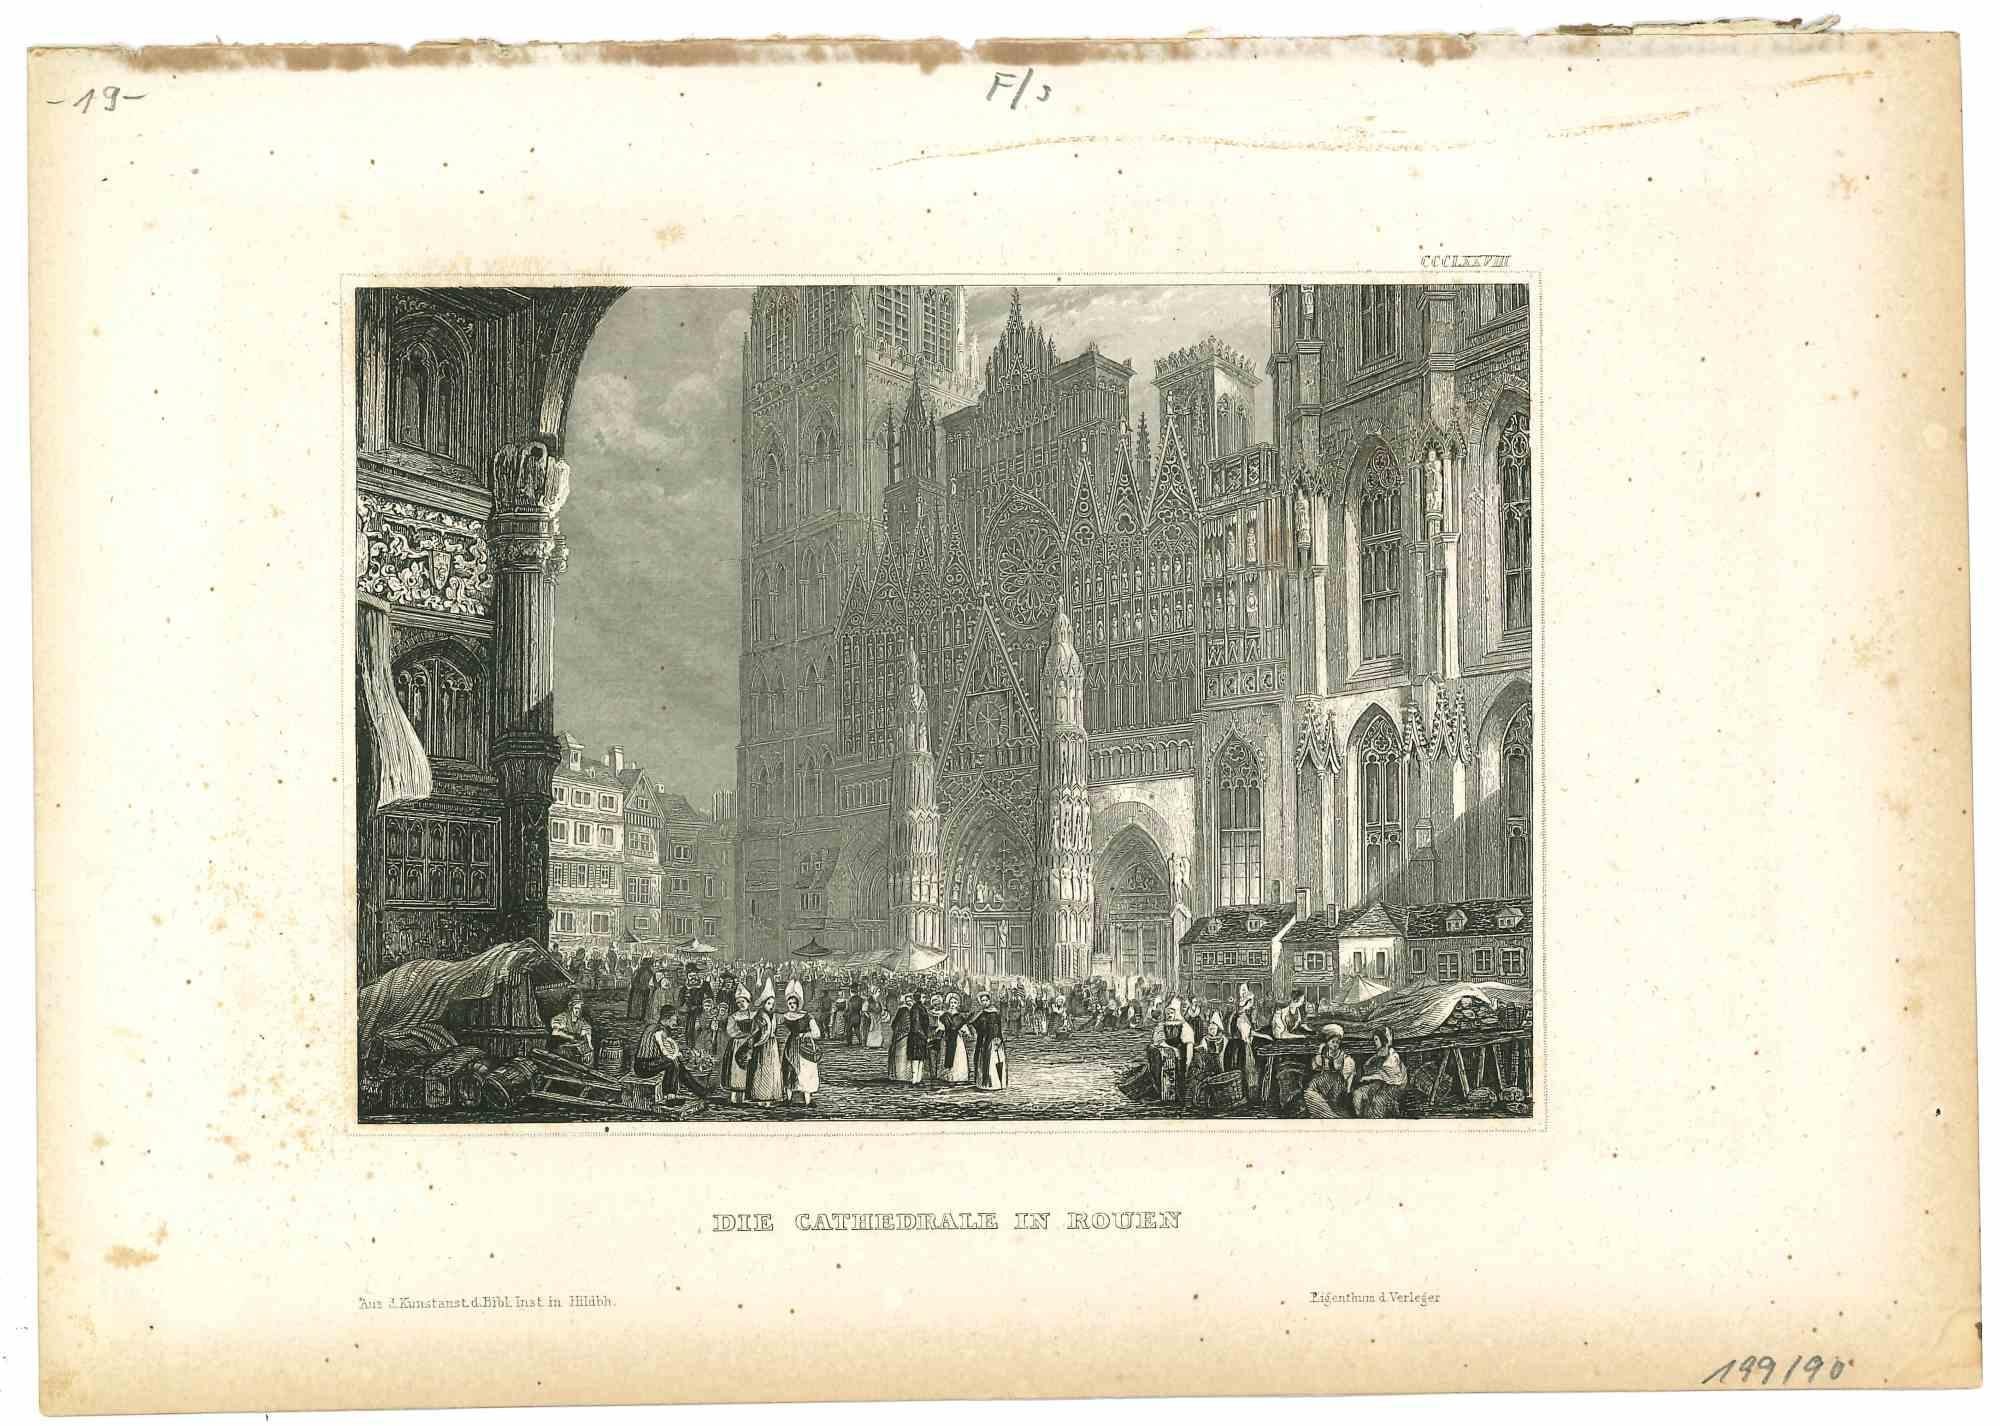 Unknown Figurative Art - Die Cathedrale in Rouen - Original Lithograph - Mid-19th Century